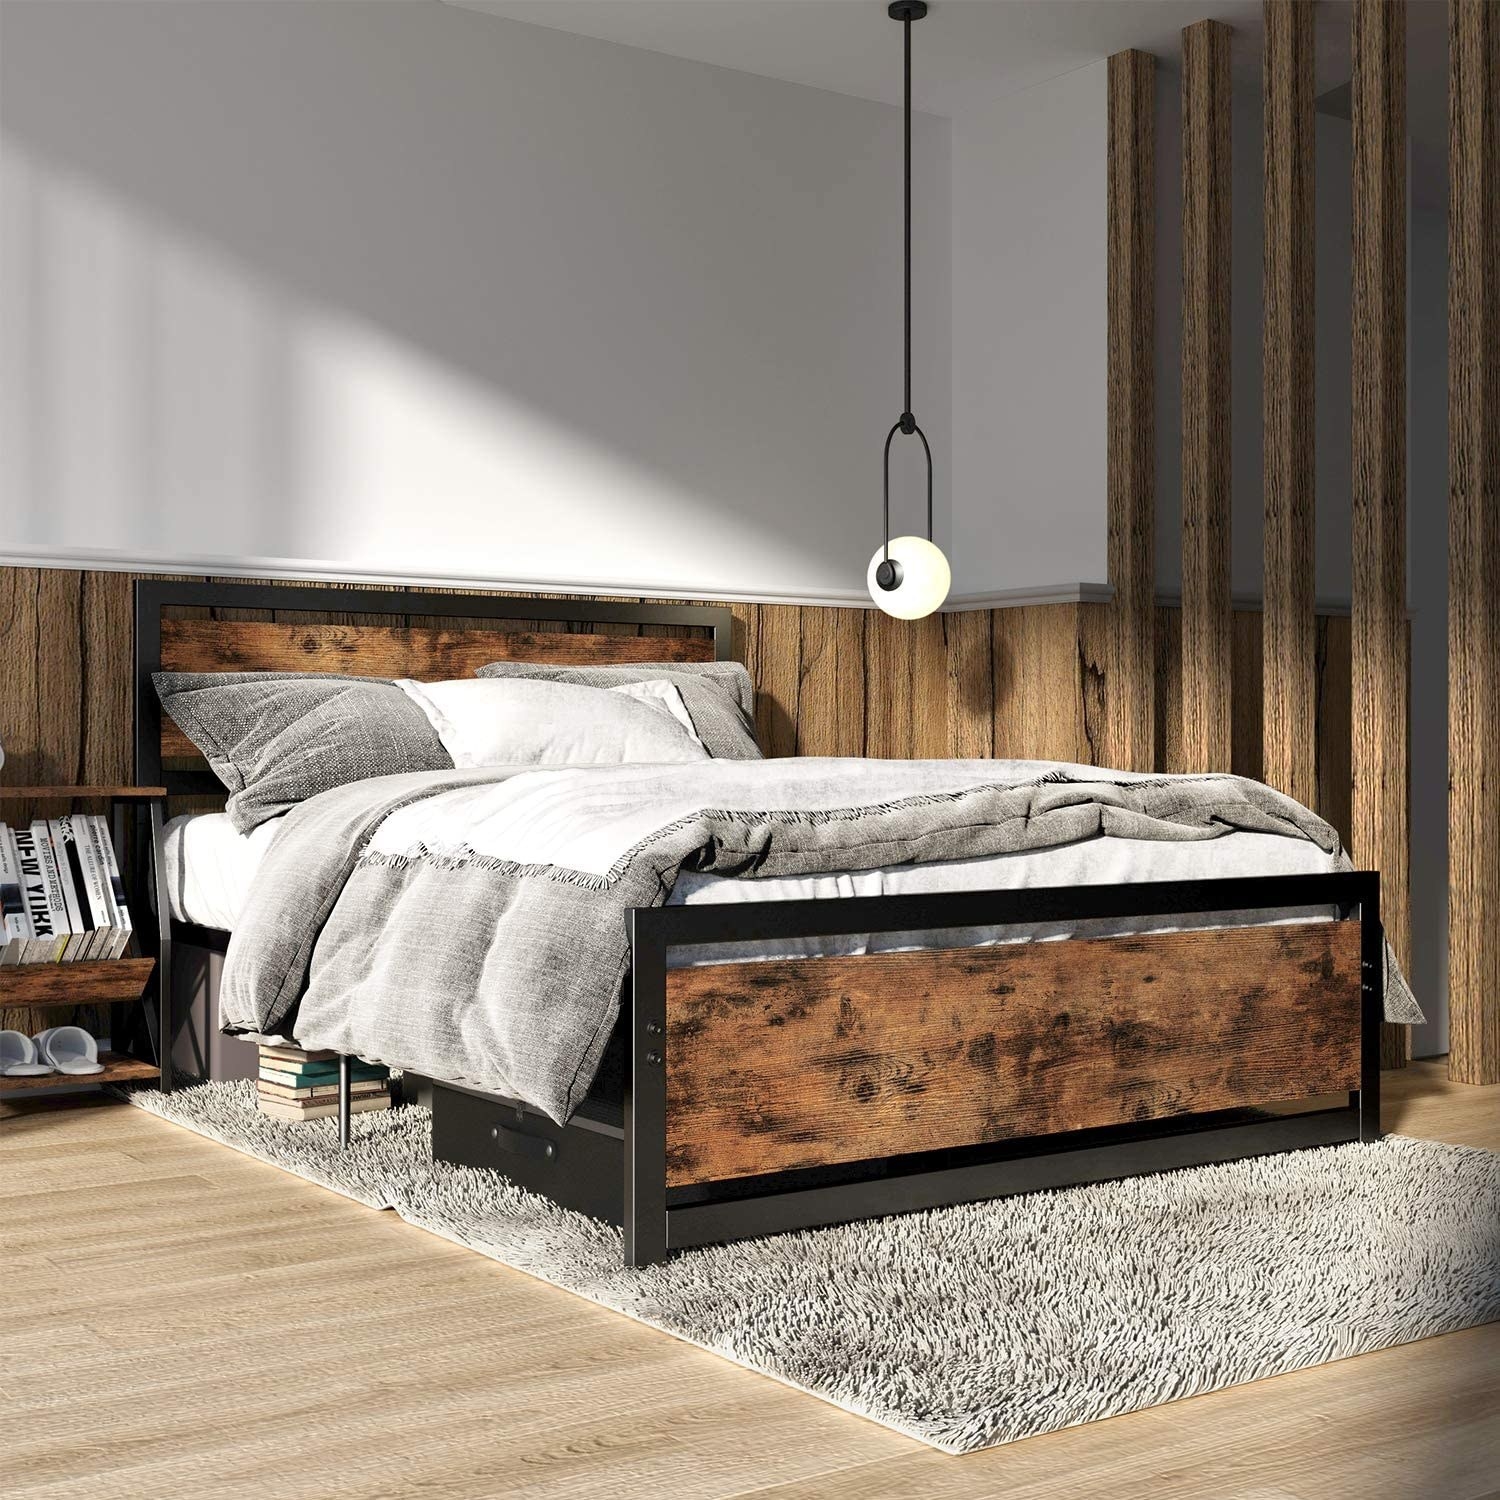 rustic industrial bed frame with bedding and lightbulb nearby